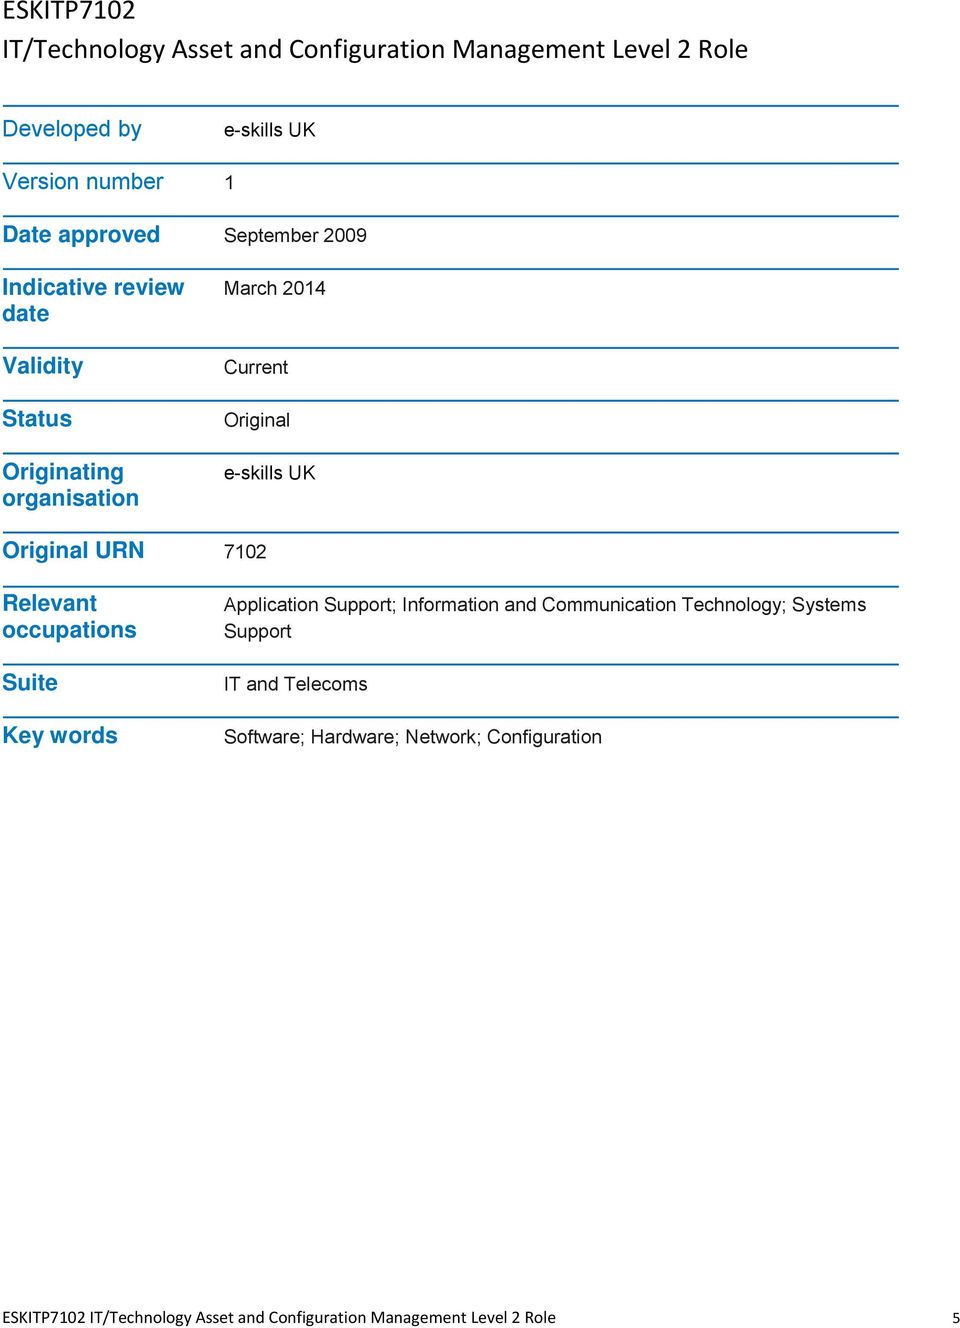 7102 Relevant occupations Suite Key words Application Support; Information and Communication